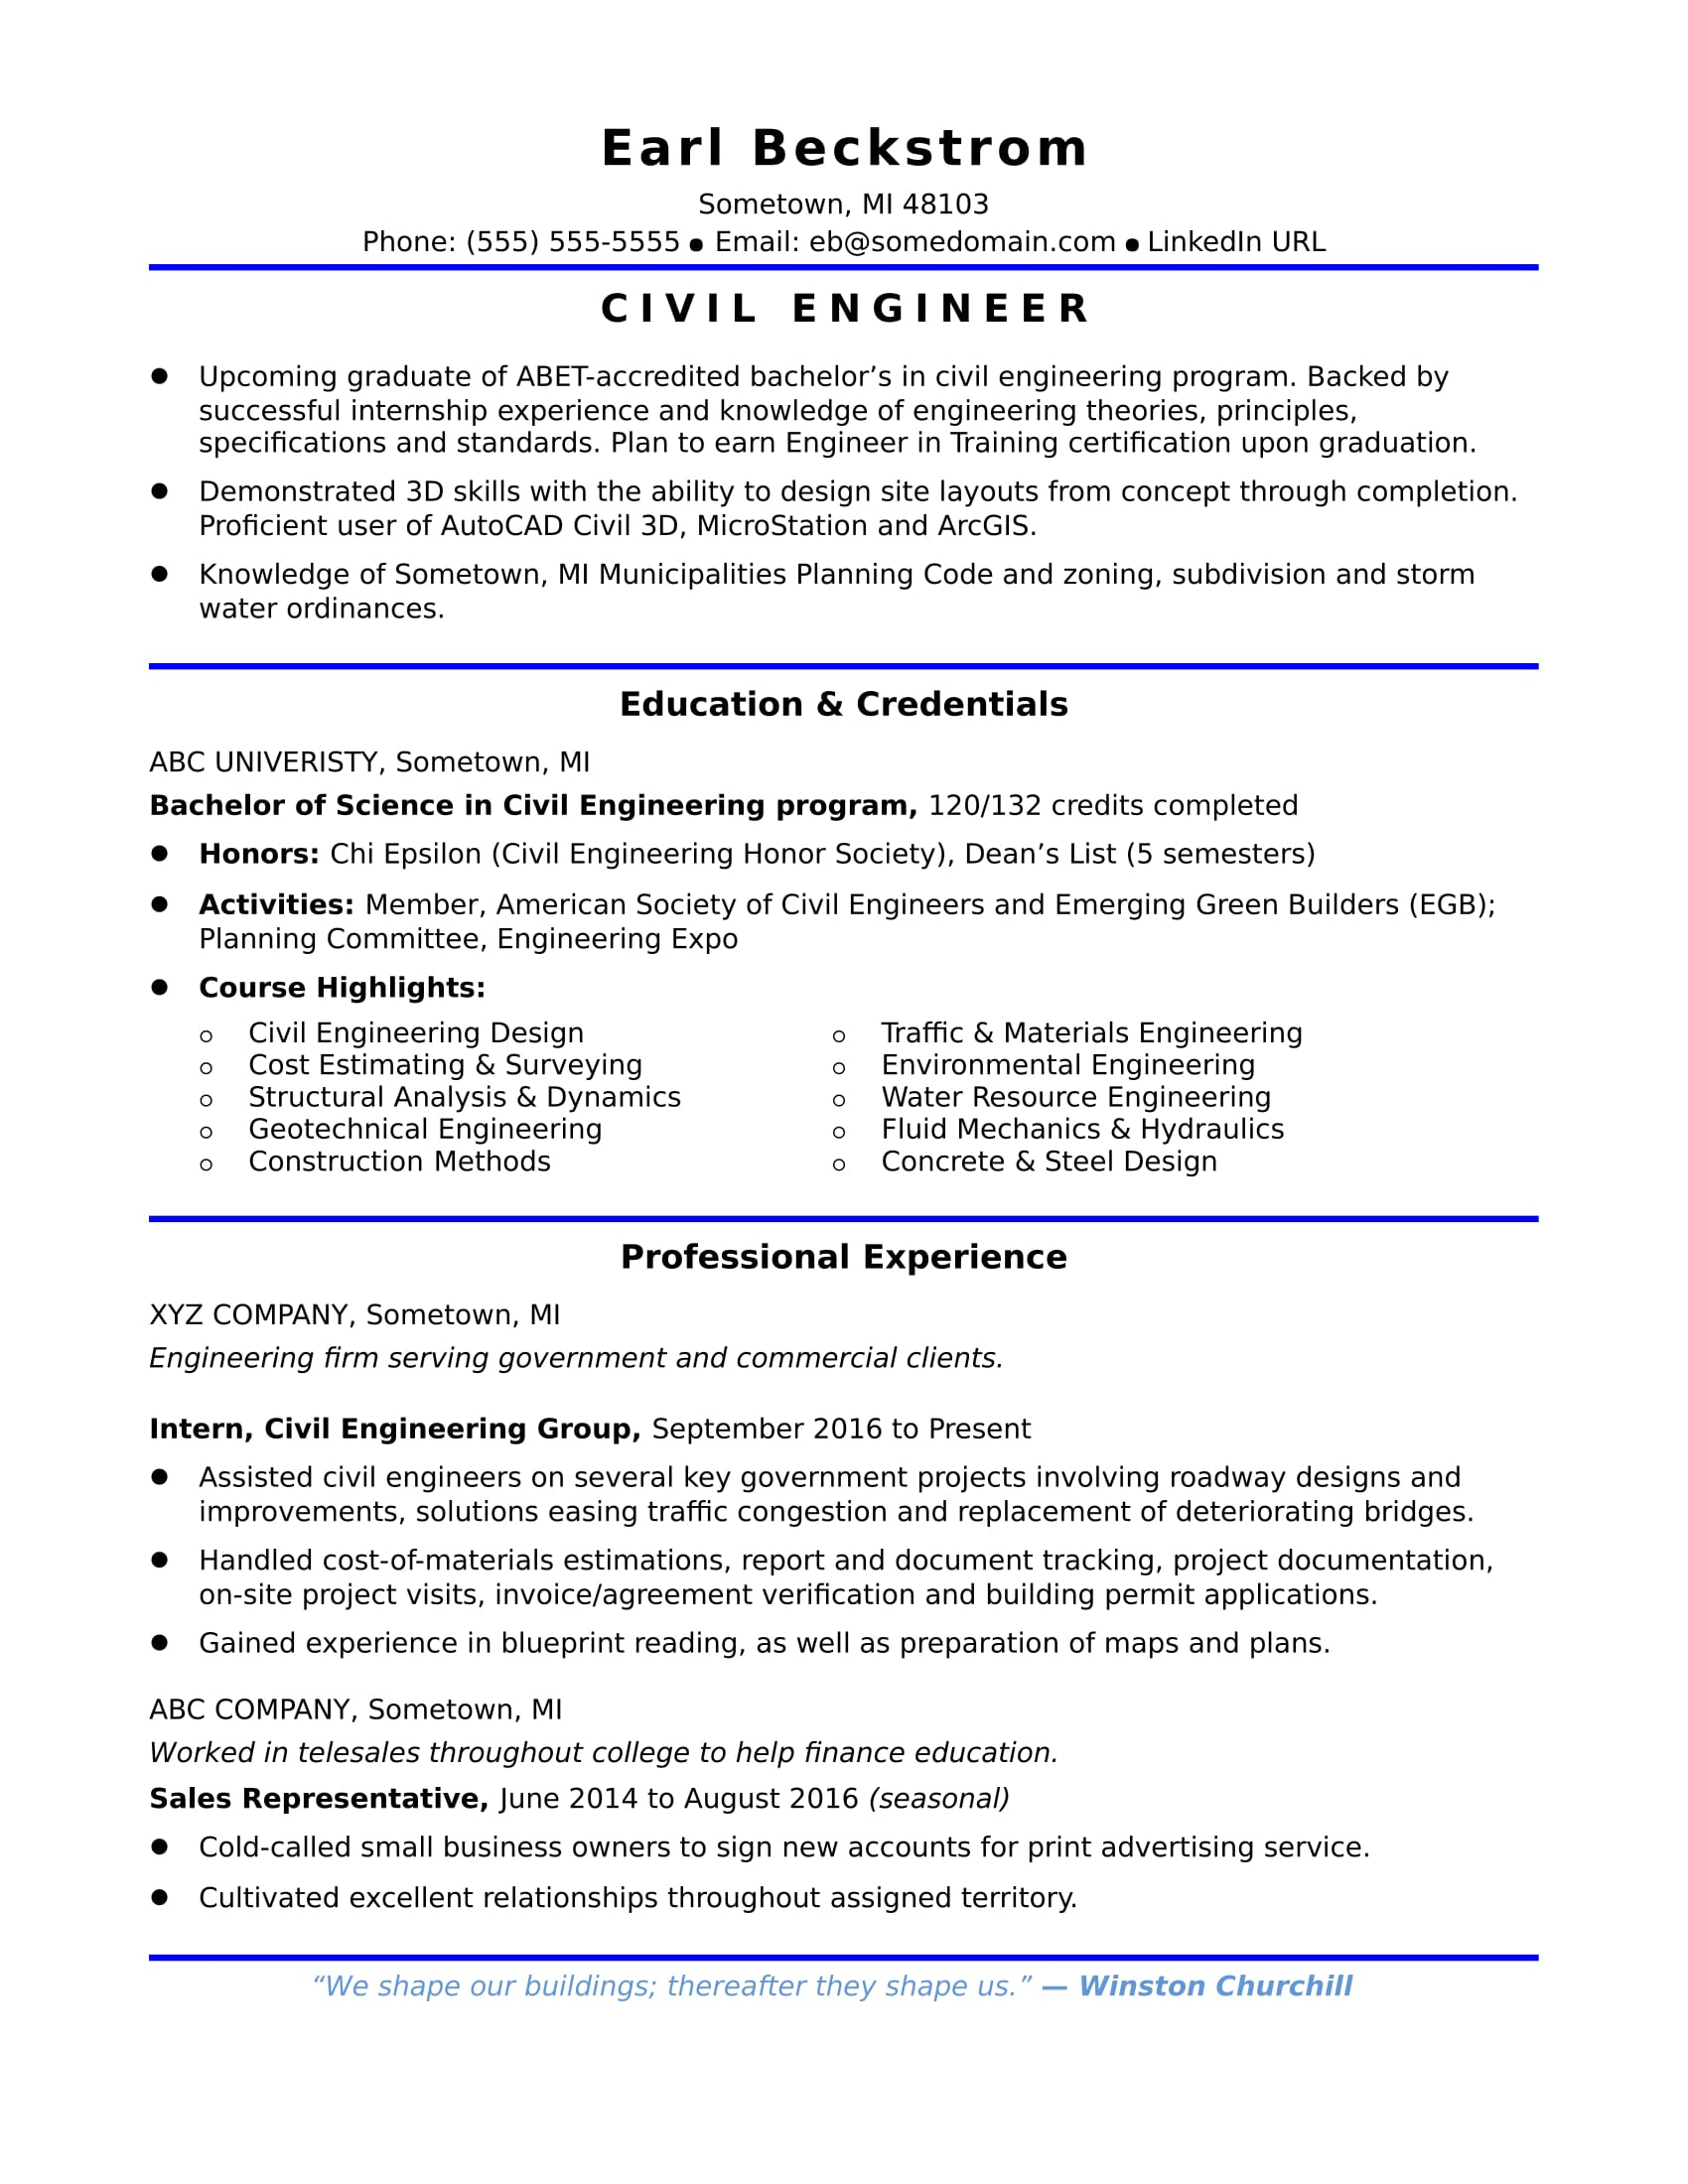 If you're just starting your civil engineering career, check out this